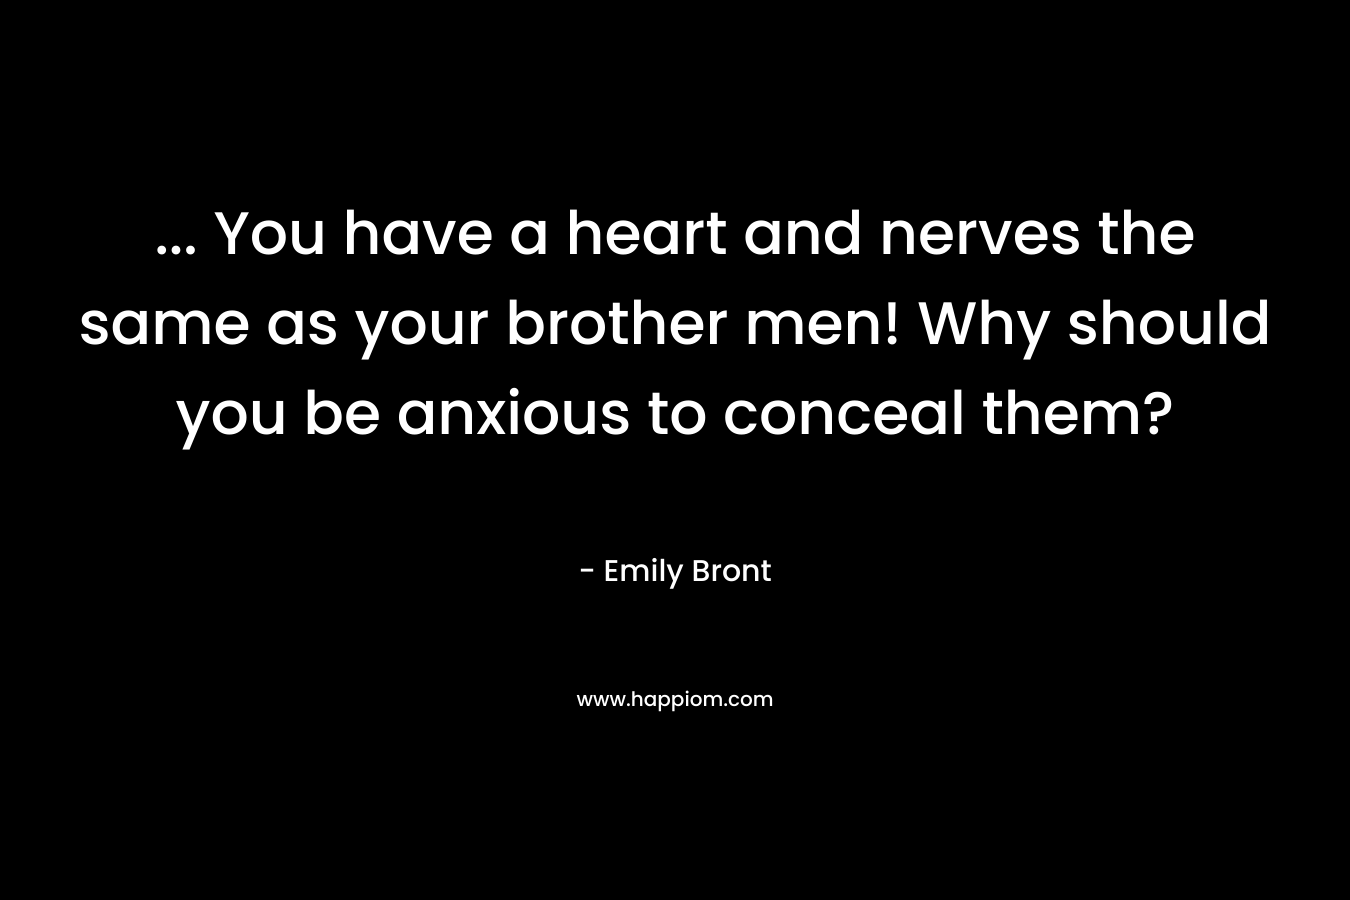 ... You have a heart and nerves the same as your brother men! Why should you be anxious to conceal them?